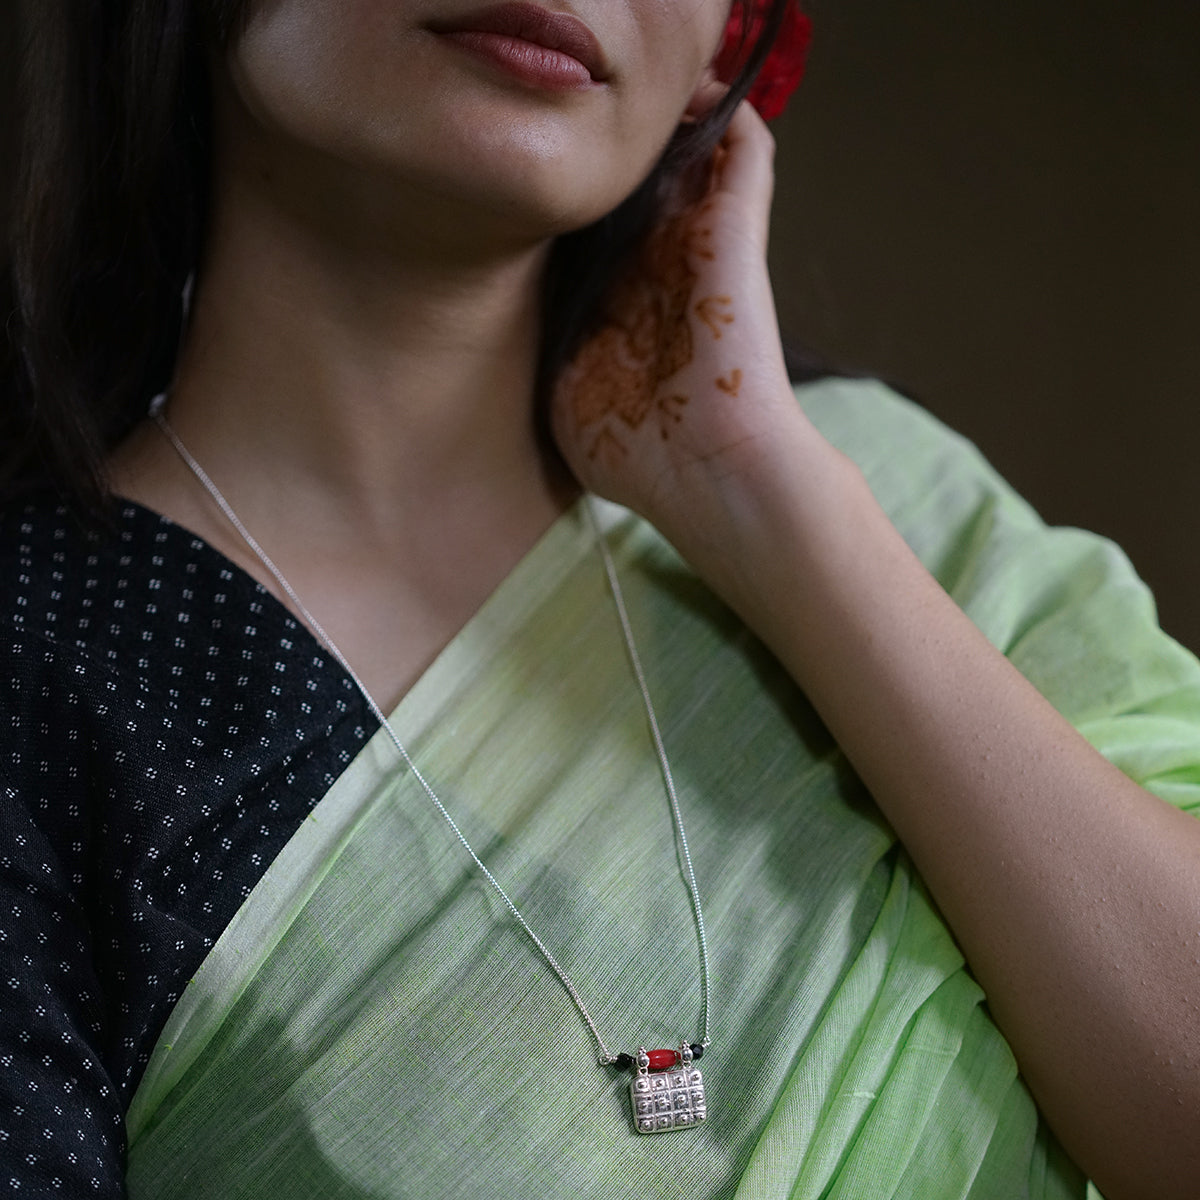 a woman in a green sari holding a cell phone to her ear